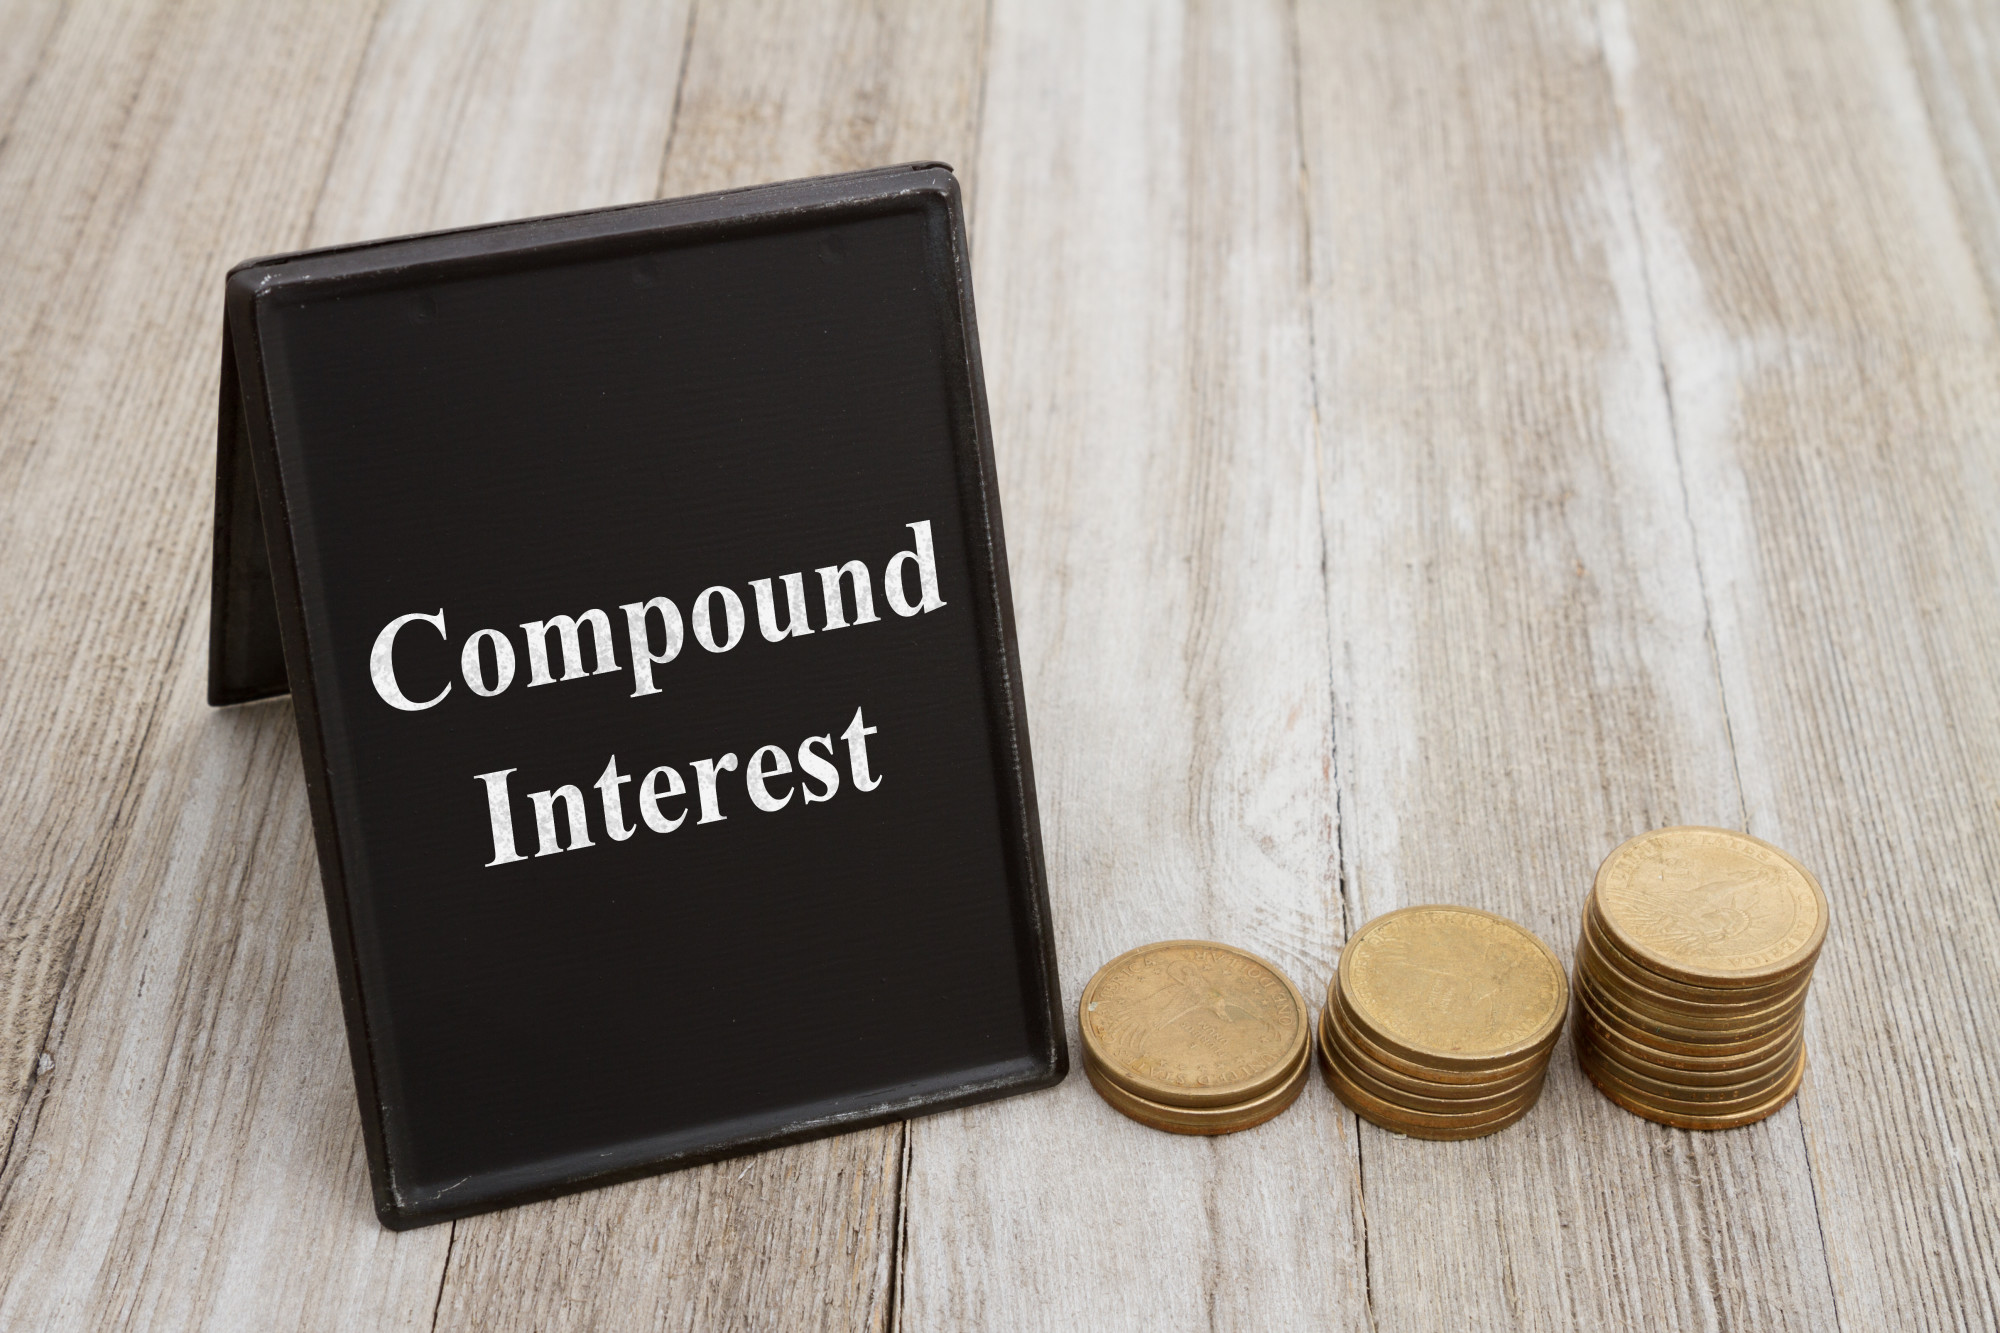 Understanding compound interest, Retro freestanding chalkboard  with gold coins on weathered wood with text Compound Interest